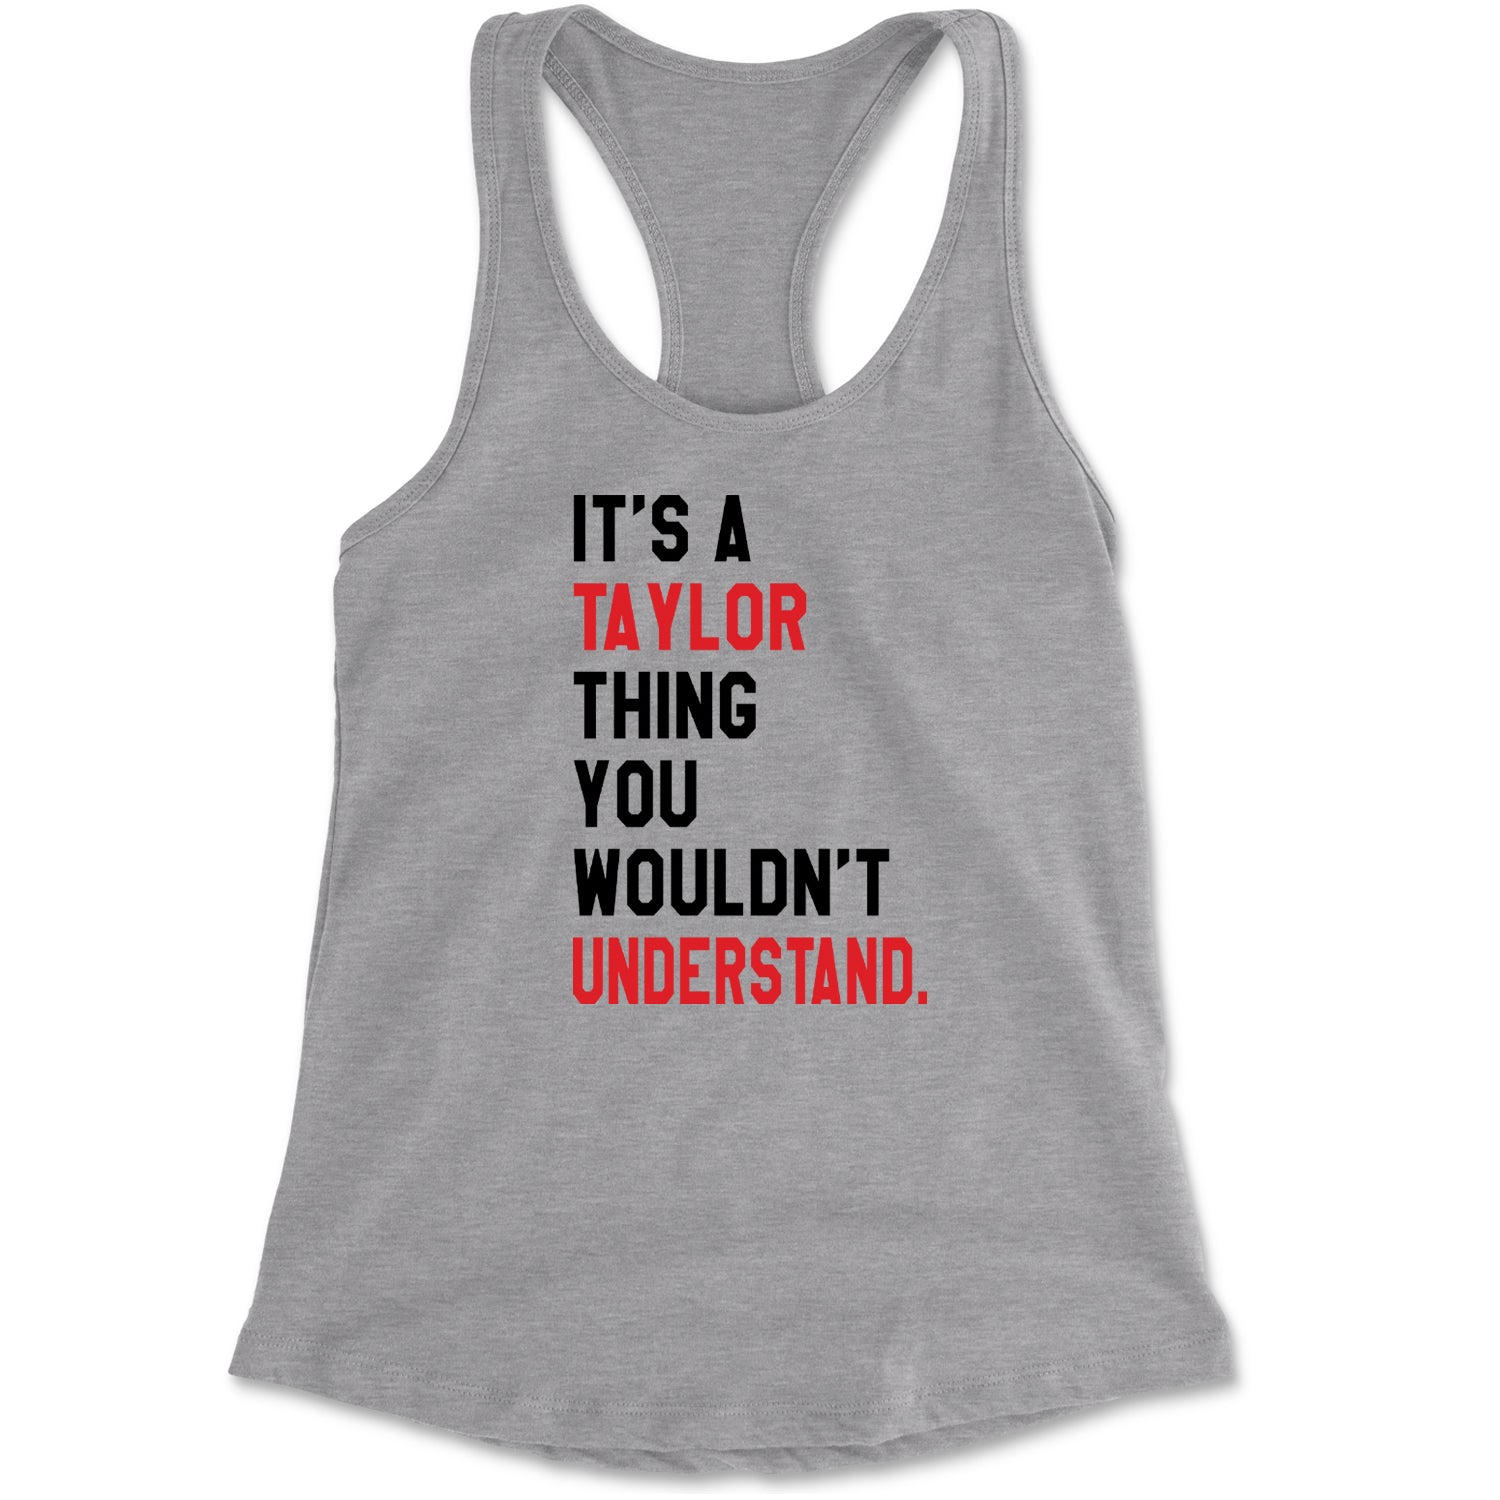 You Wouldn't Understand It's A Taylor Thing TTPD Racerback Tank Top for Women